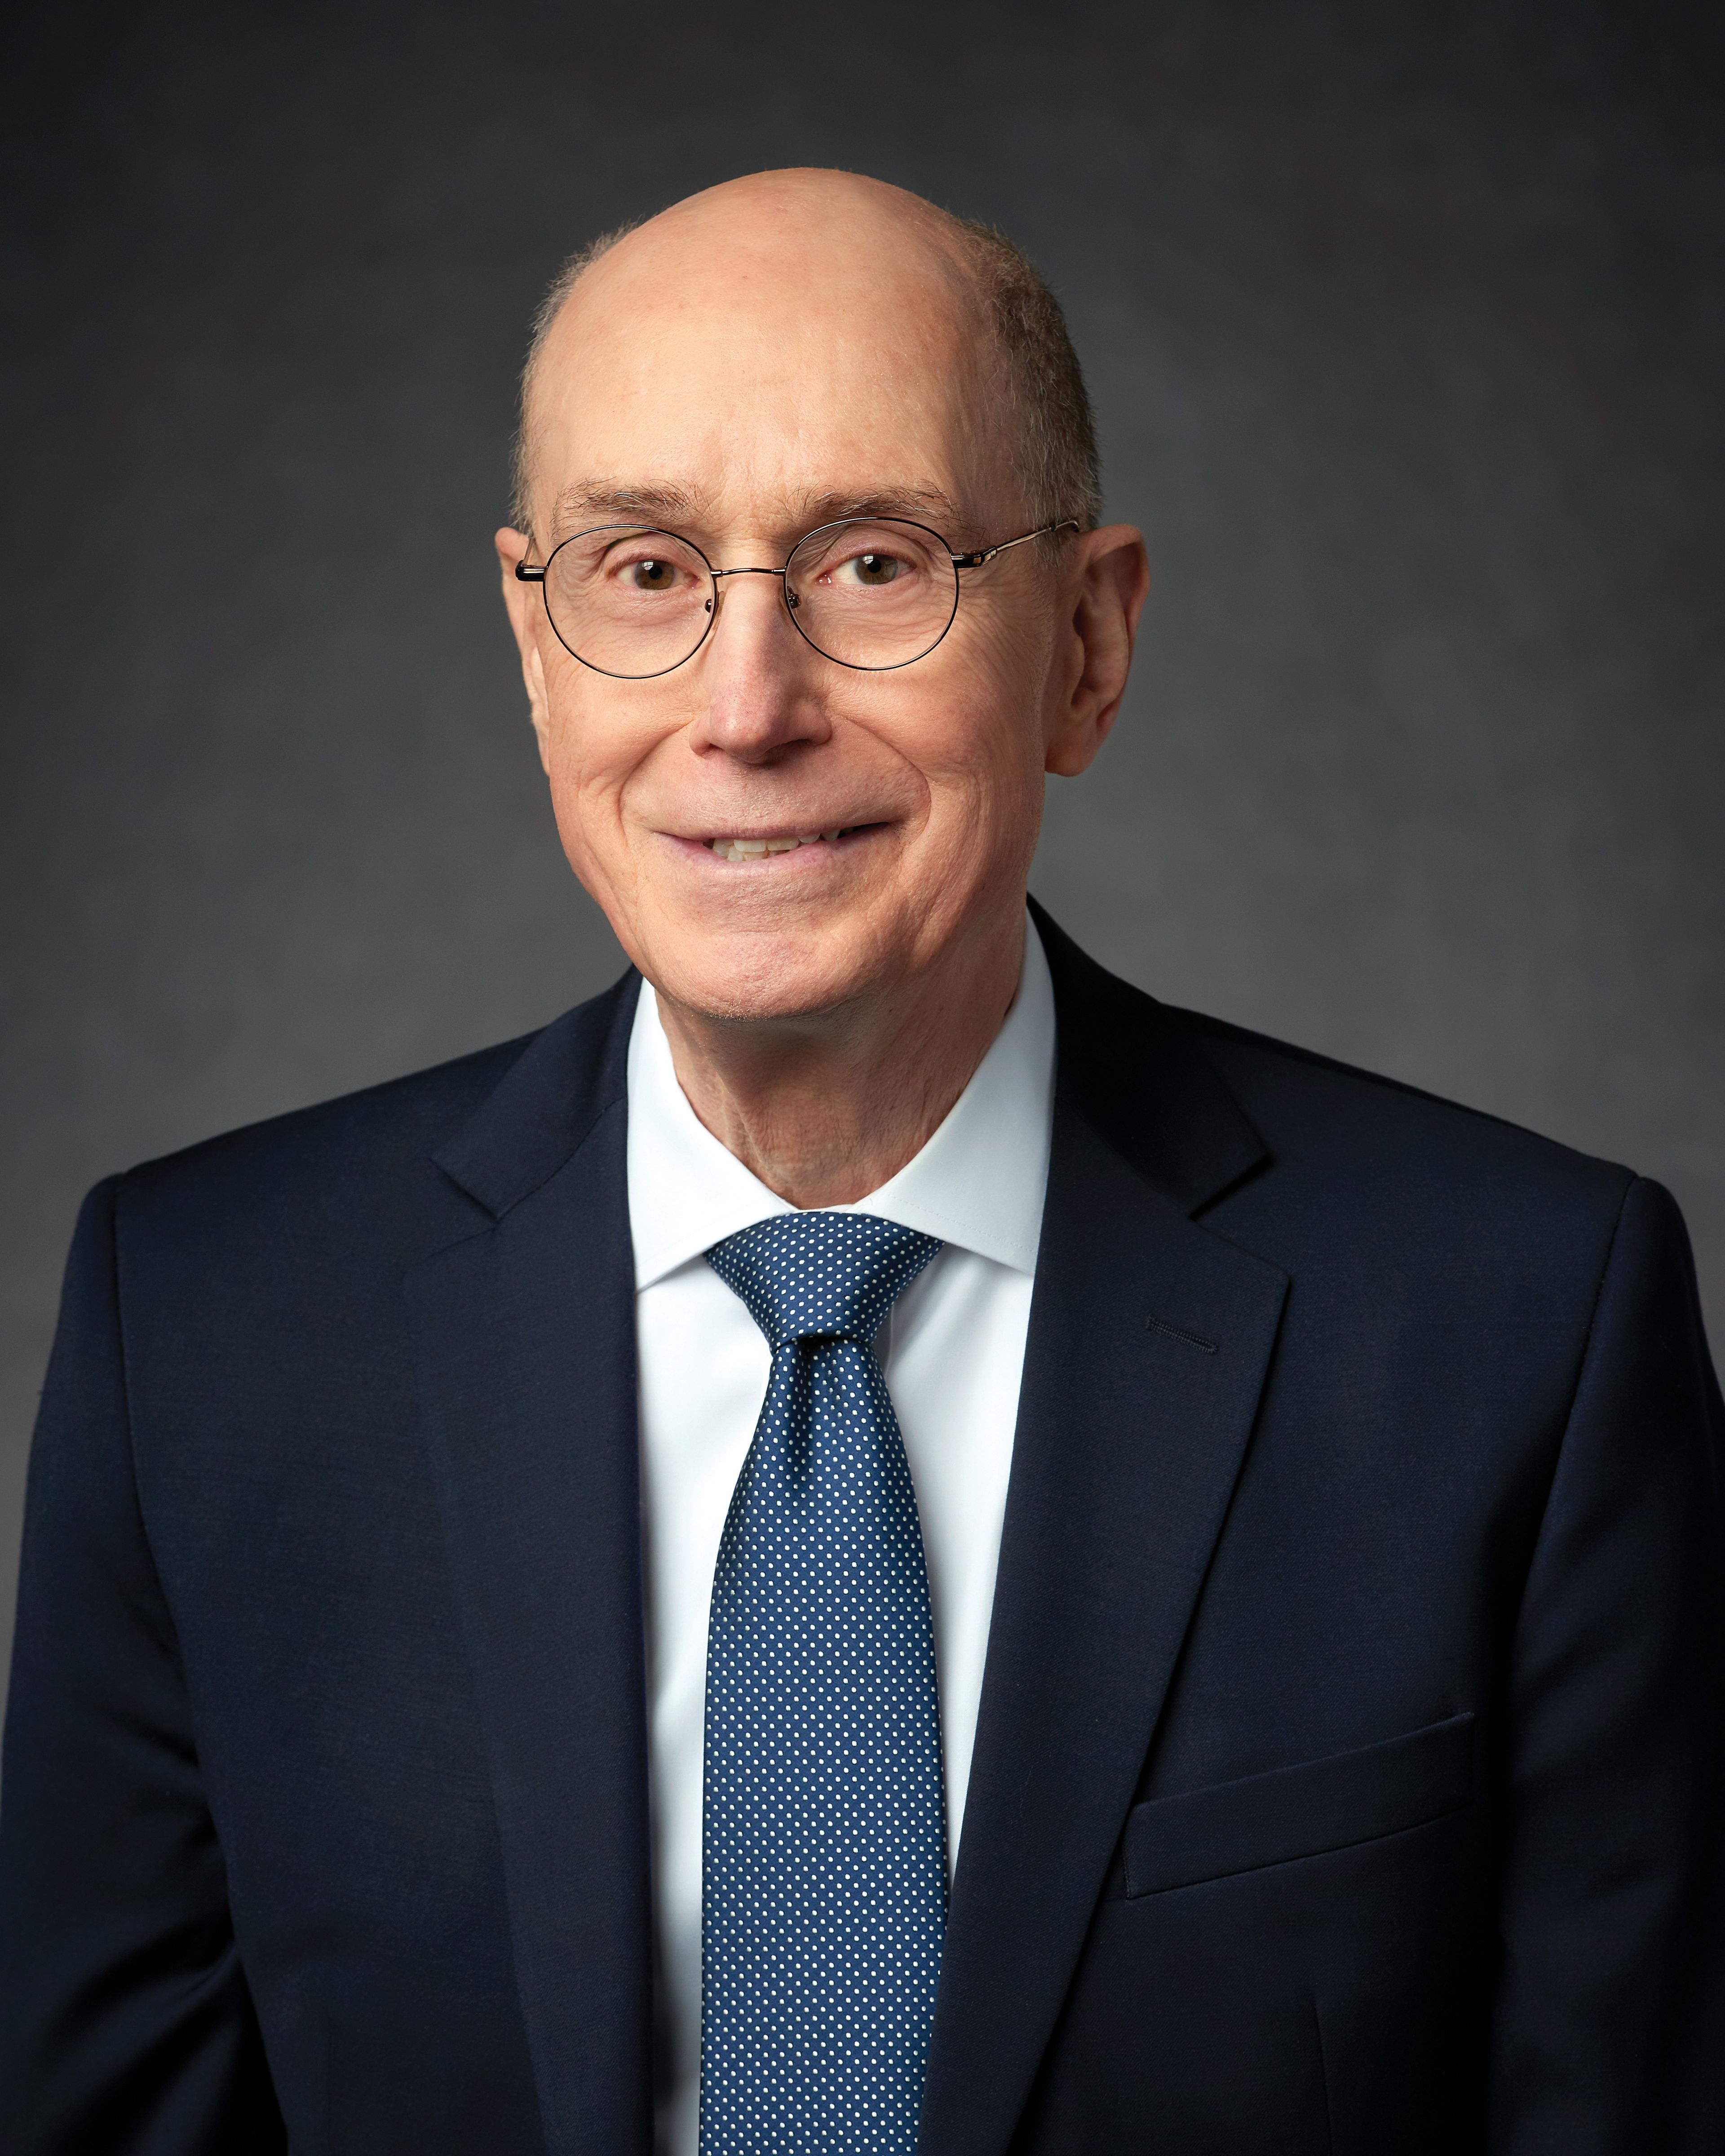 The Official Portrait of Henry B. Eyring.